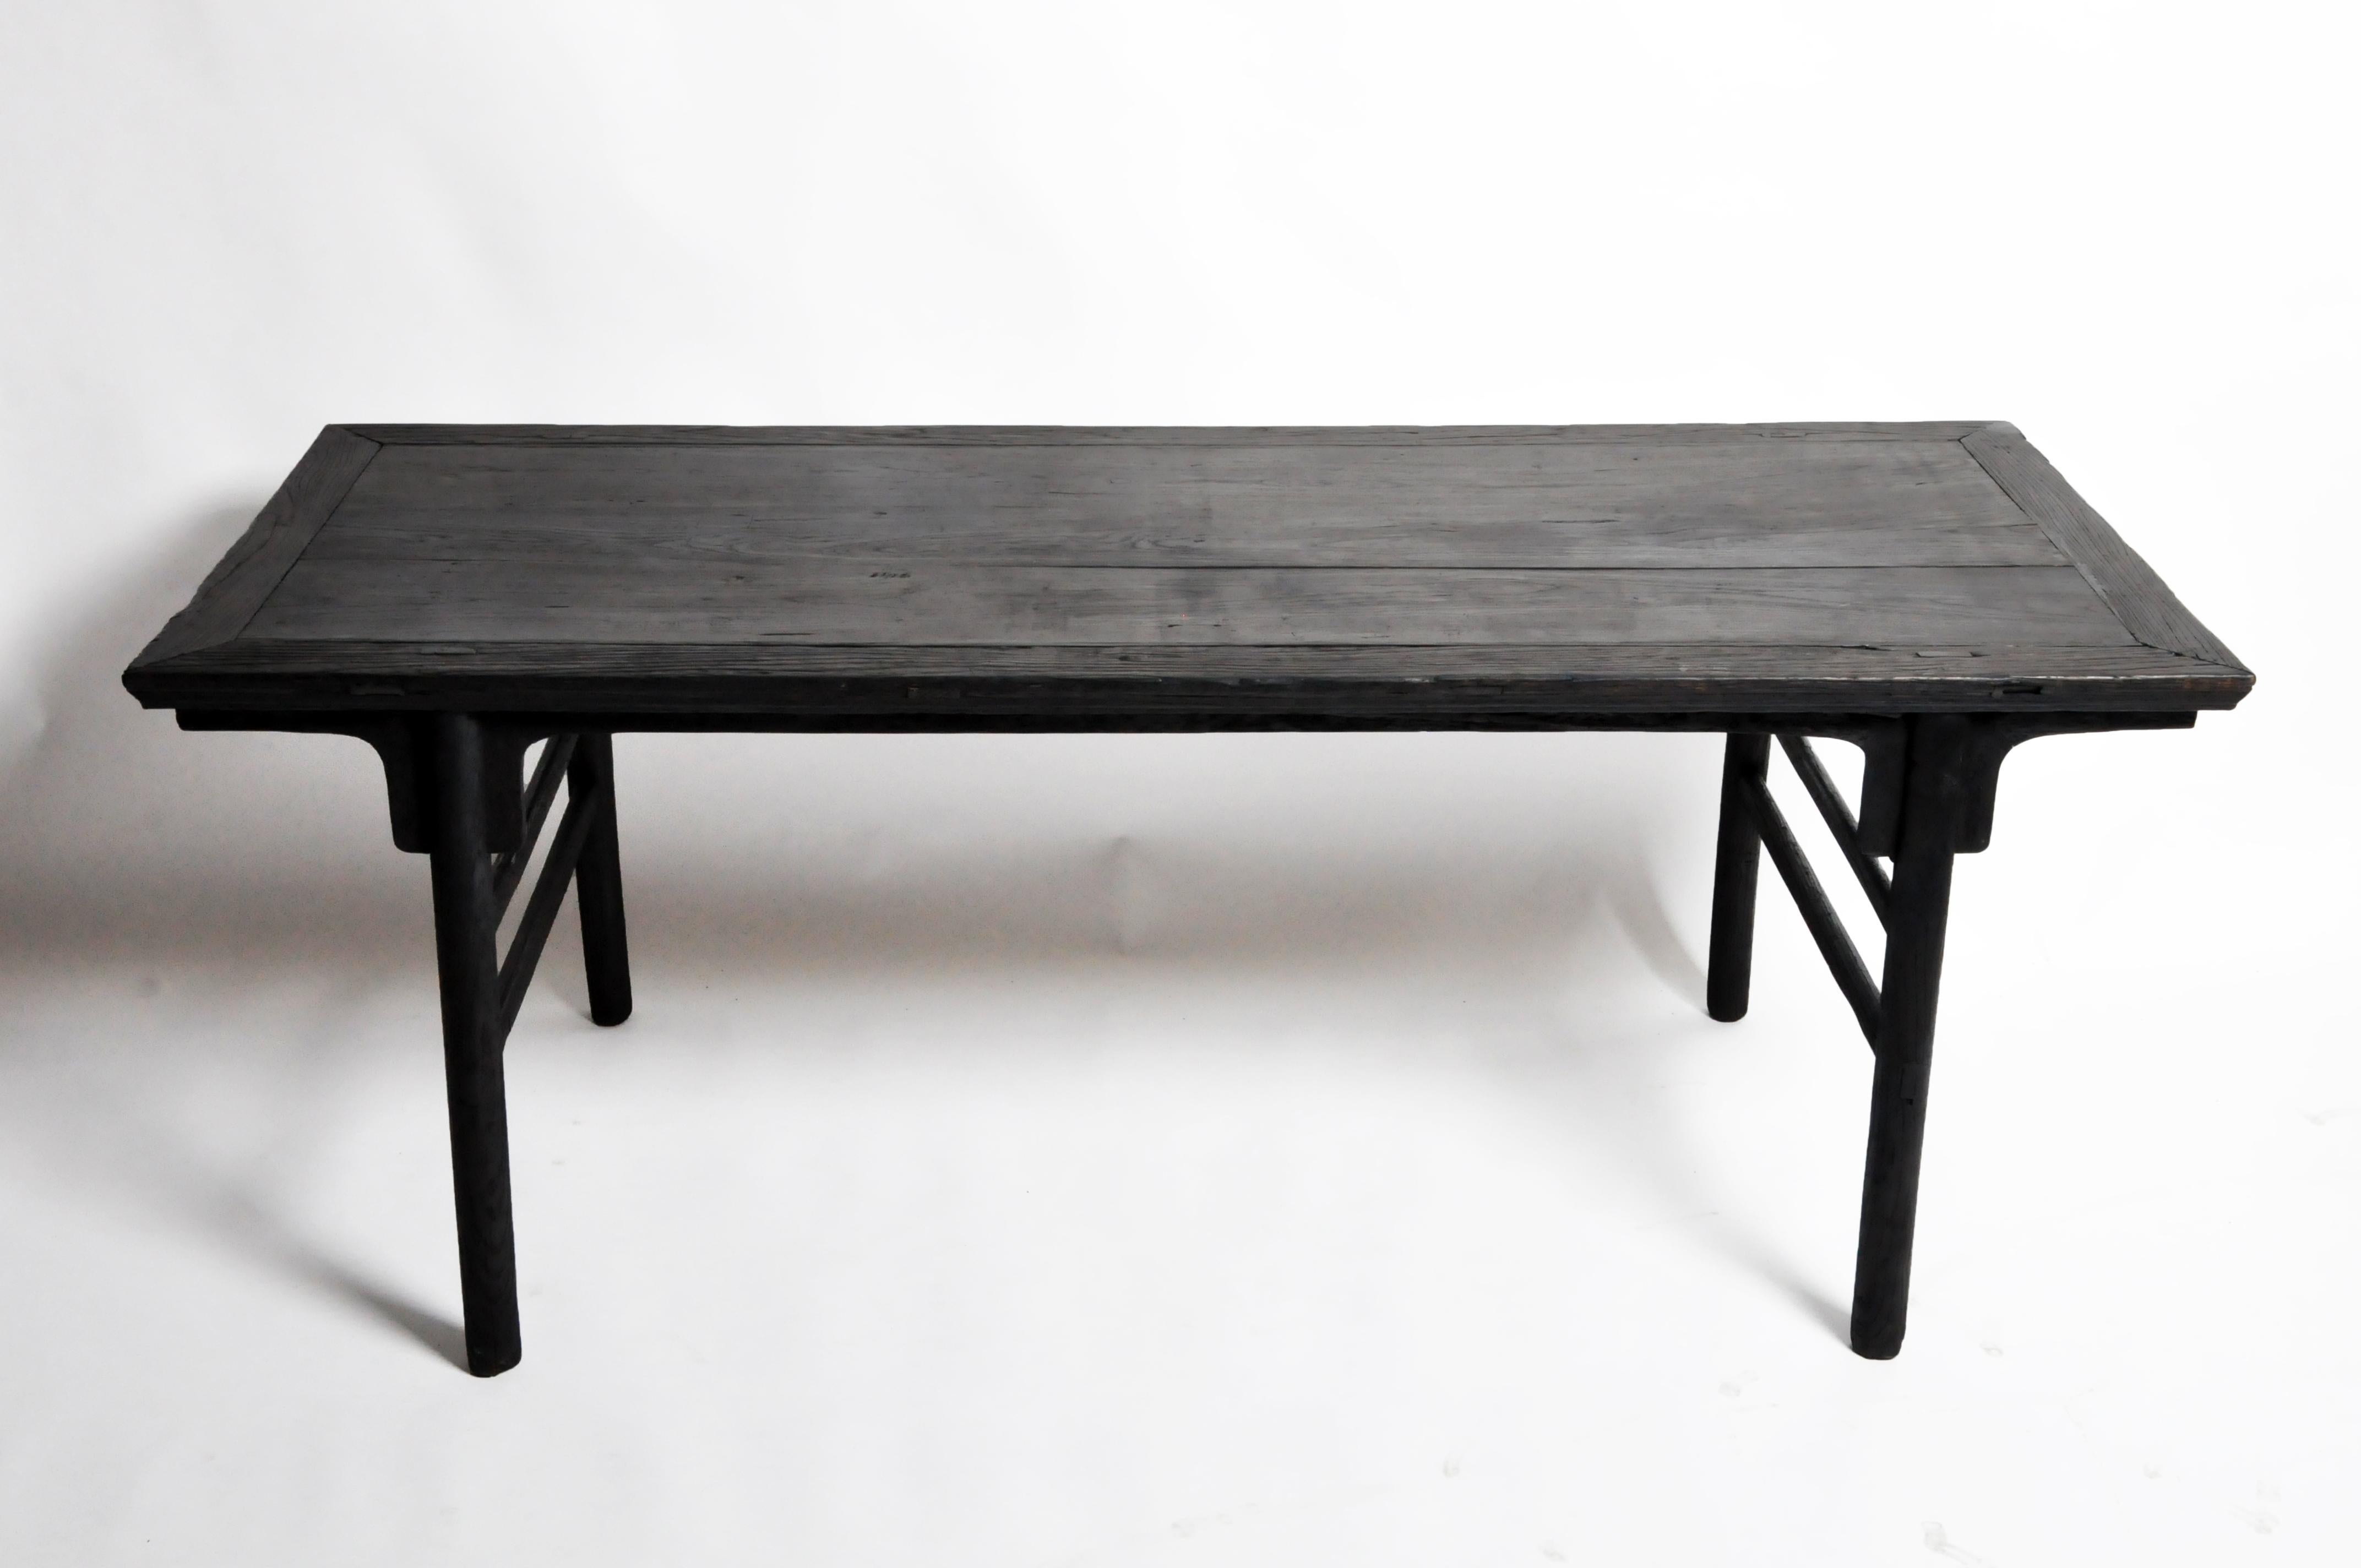 This table is simple in its design. The legs are set back from the edge of the tabletop and are slightly splayed to provide stability. The apron is straight and unadorned. A pair of rounded stretchers provide additional support. Like most Chinese